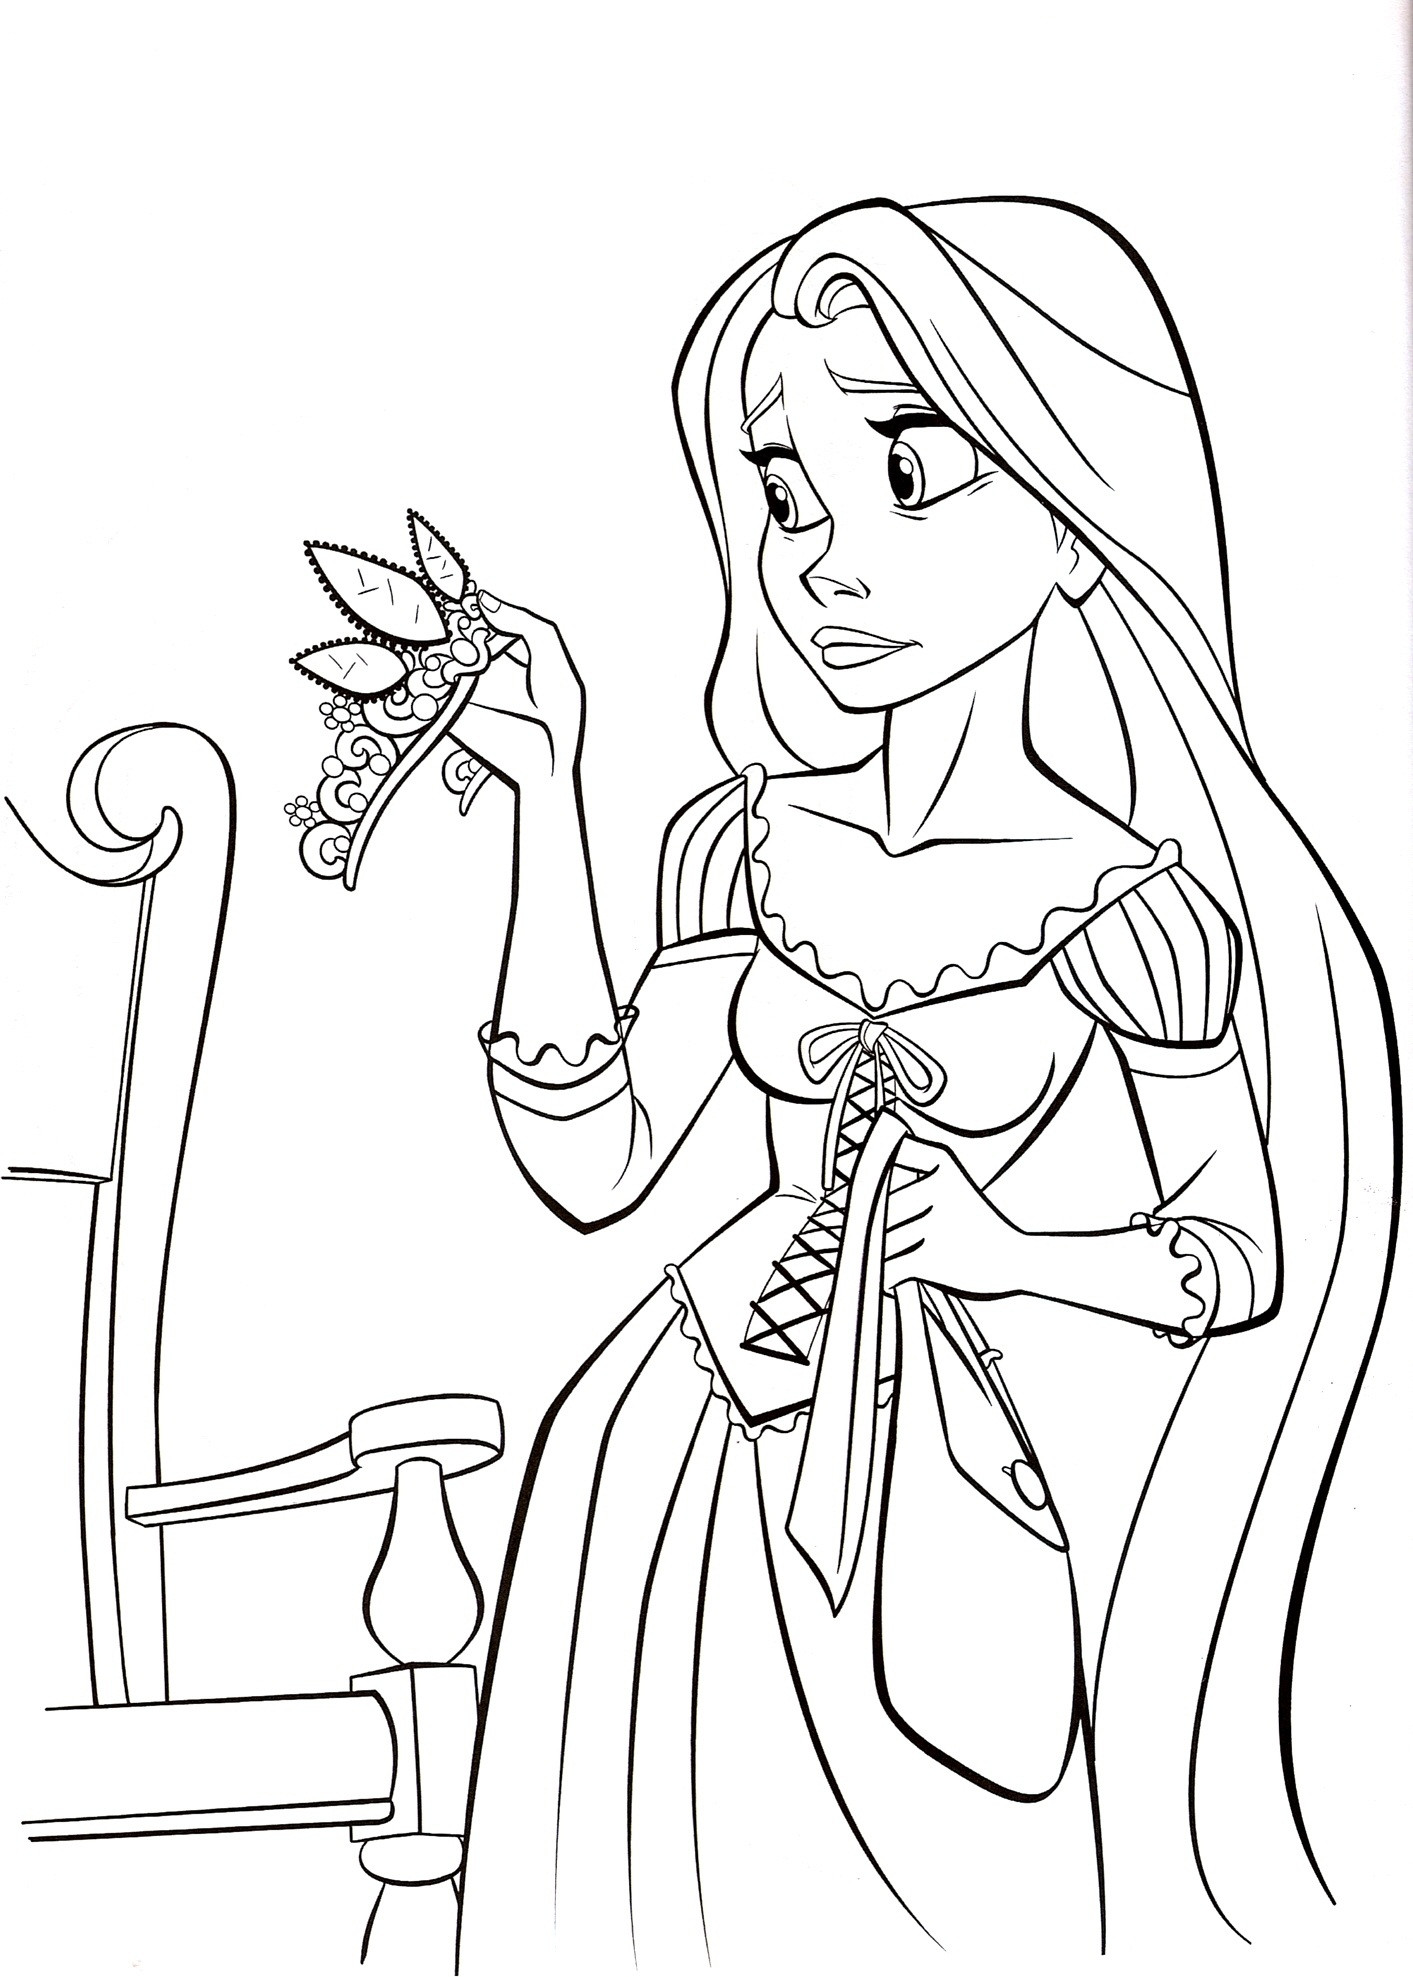 Disney Rapunzel Coloring Pages For Toddlers
 Free Printable Tangled Coloring Pages For Kids